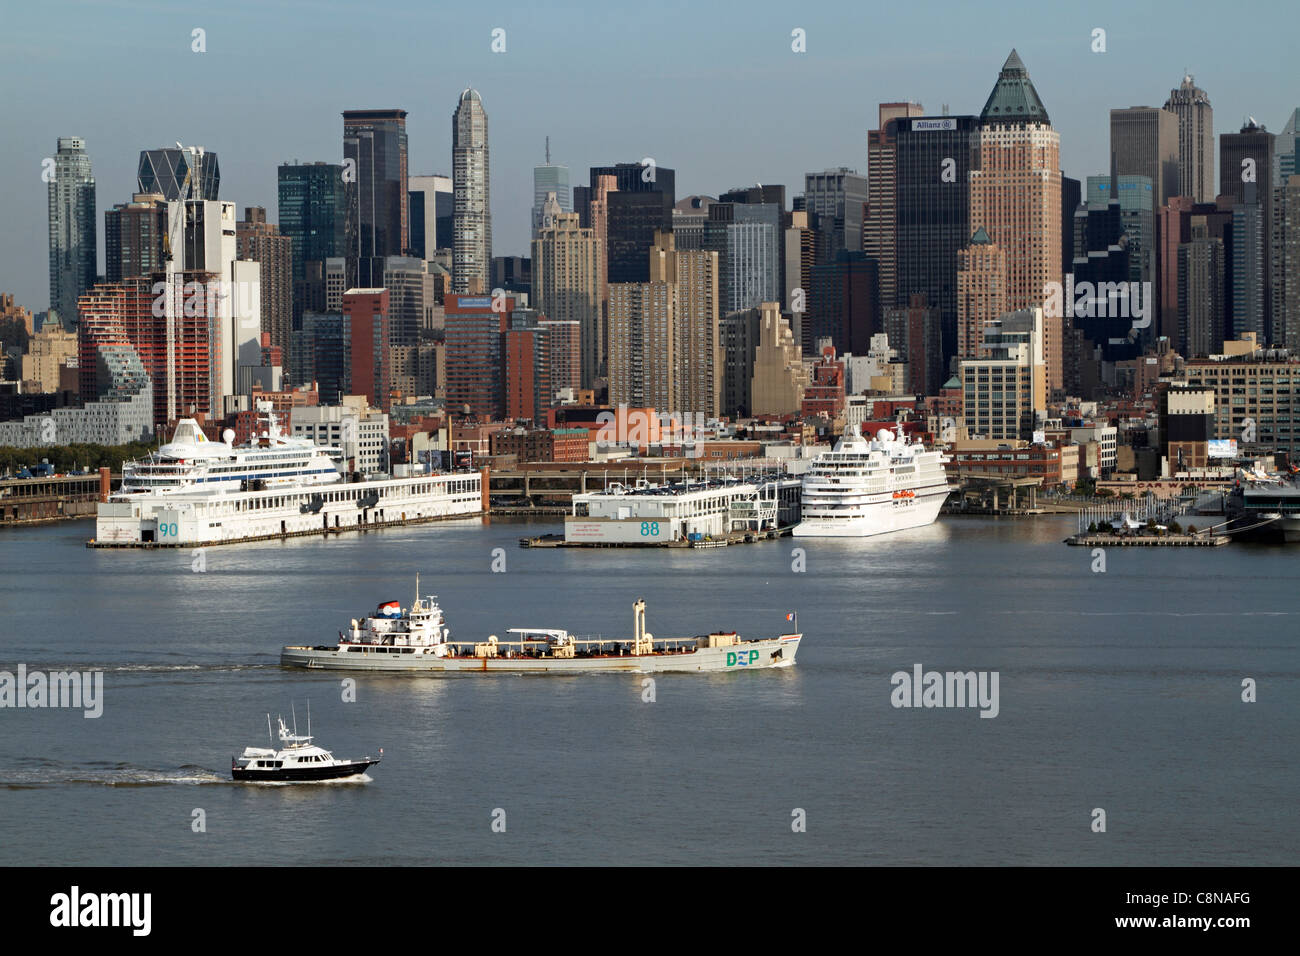 Boats on the Hudson River passing docked cruise ships.. The boat in the middle of the river is a sludge boat. Stock Photo